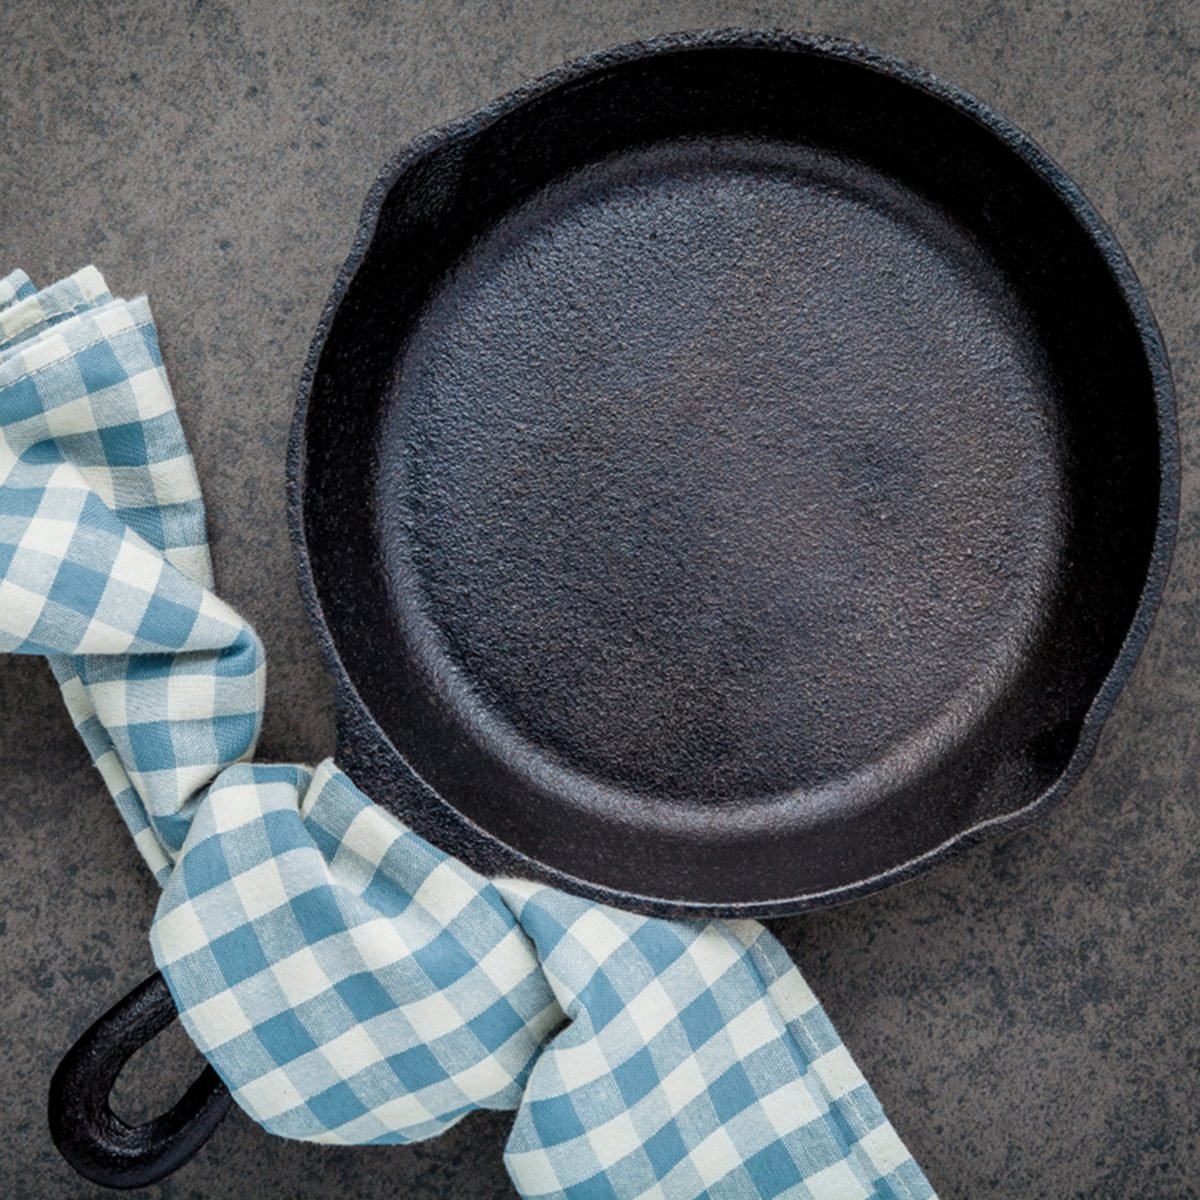 How To Season A Cast Iron Skillet Taste Of Home 